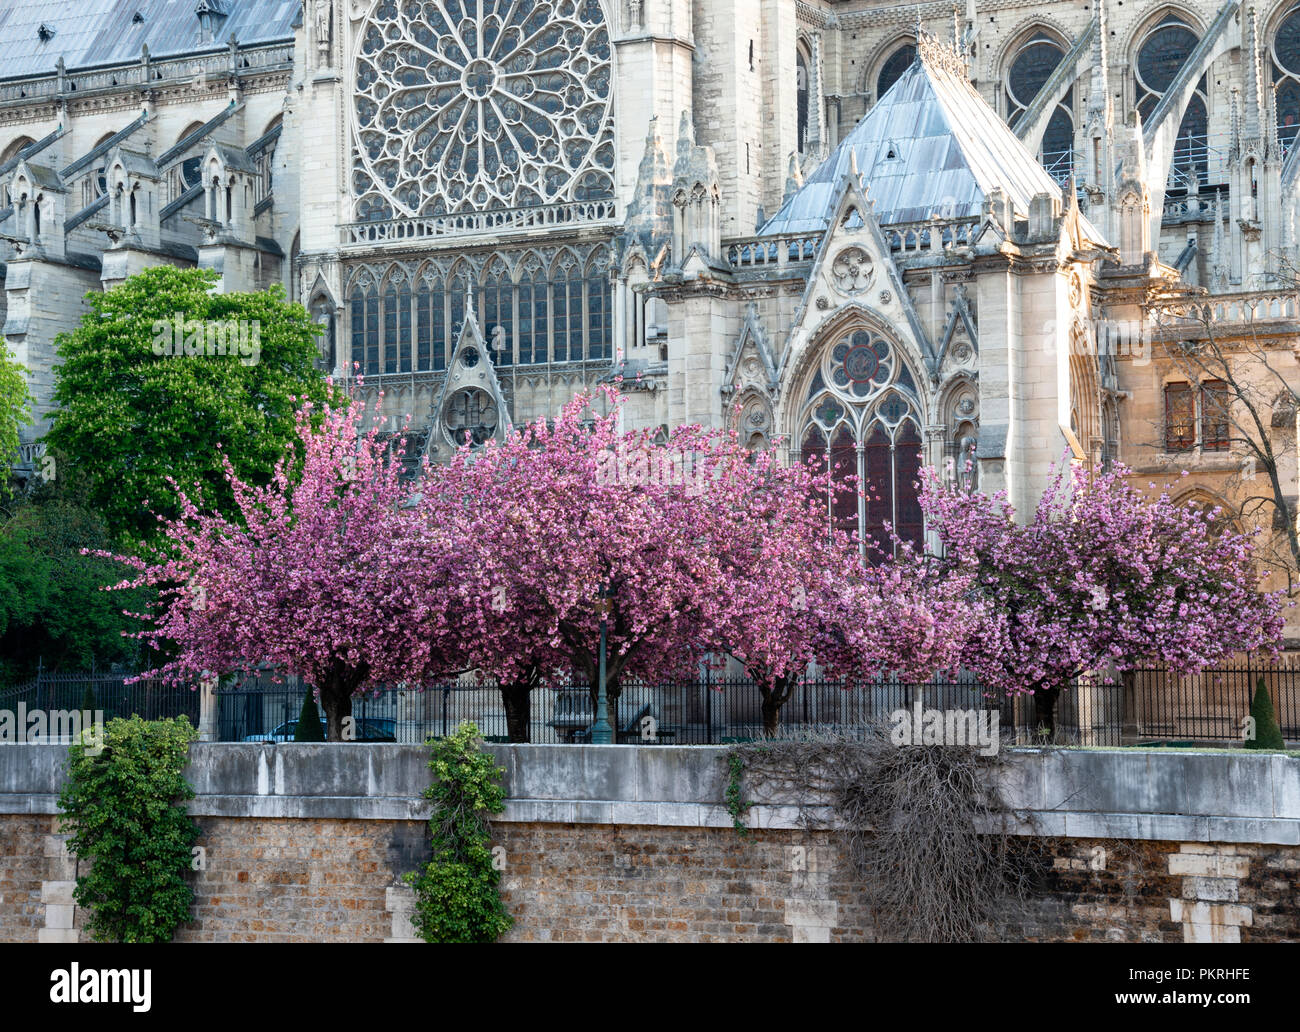 View of the cherry blossom trees in full bloom along the side of the Notre Dame Cathedral in Paris, France. Stock Photo